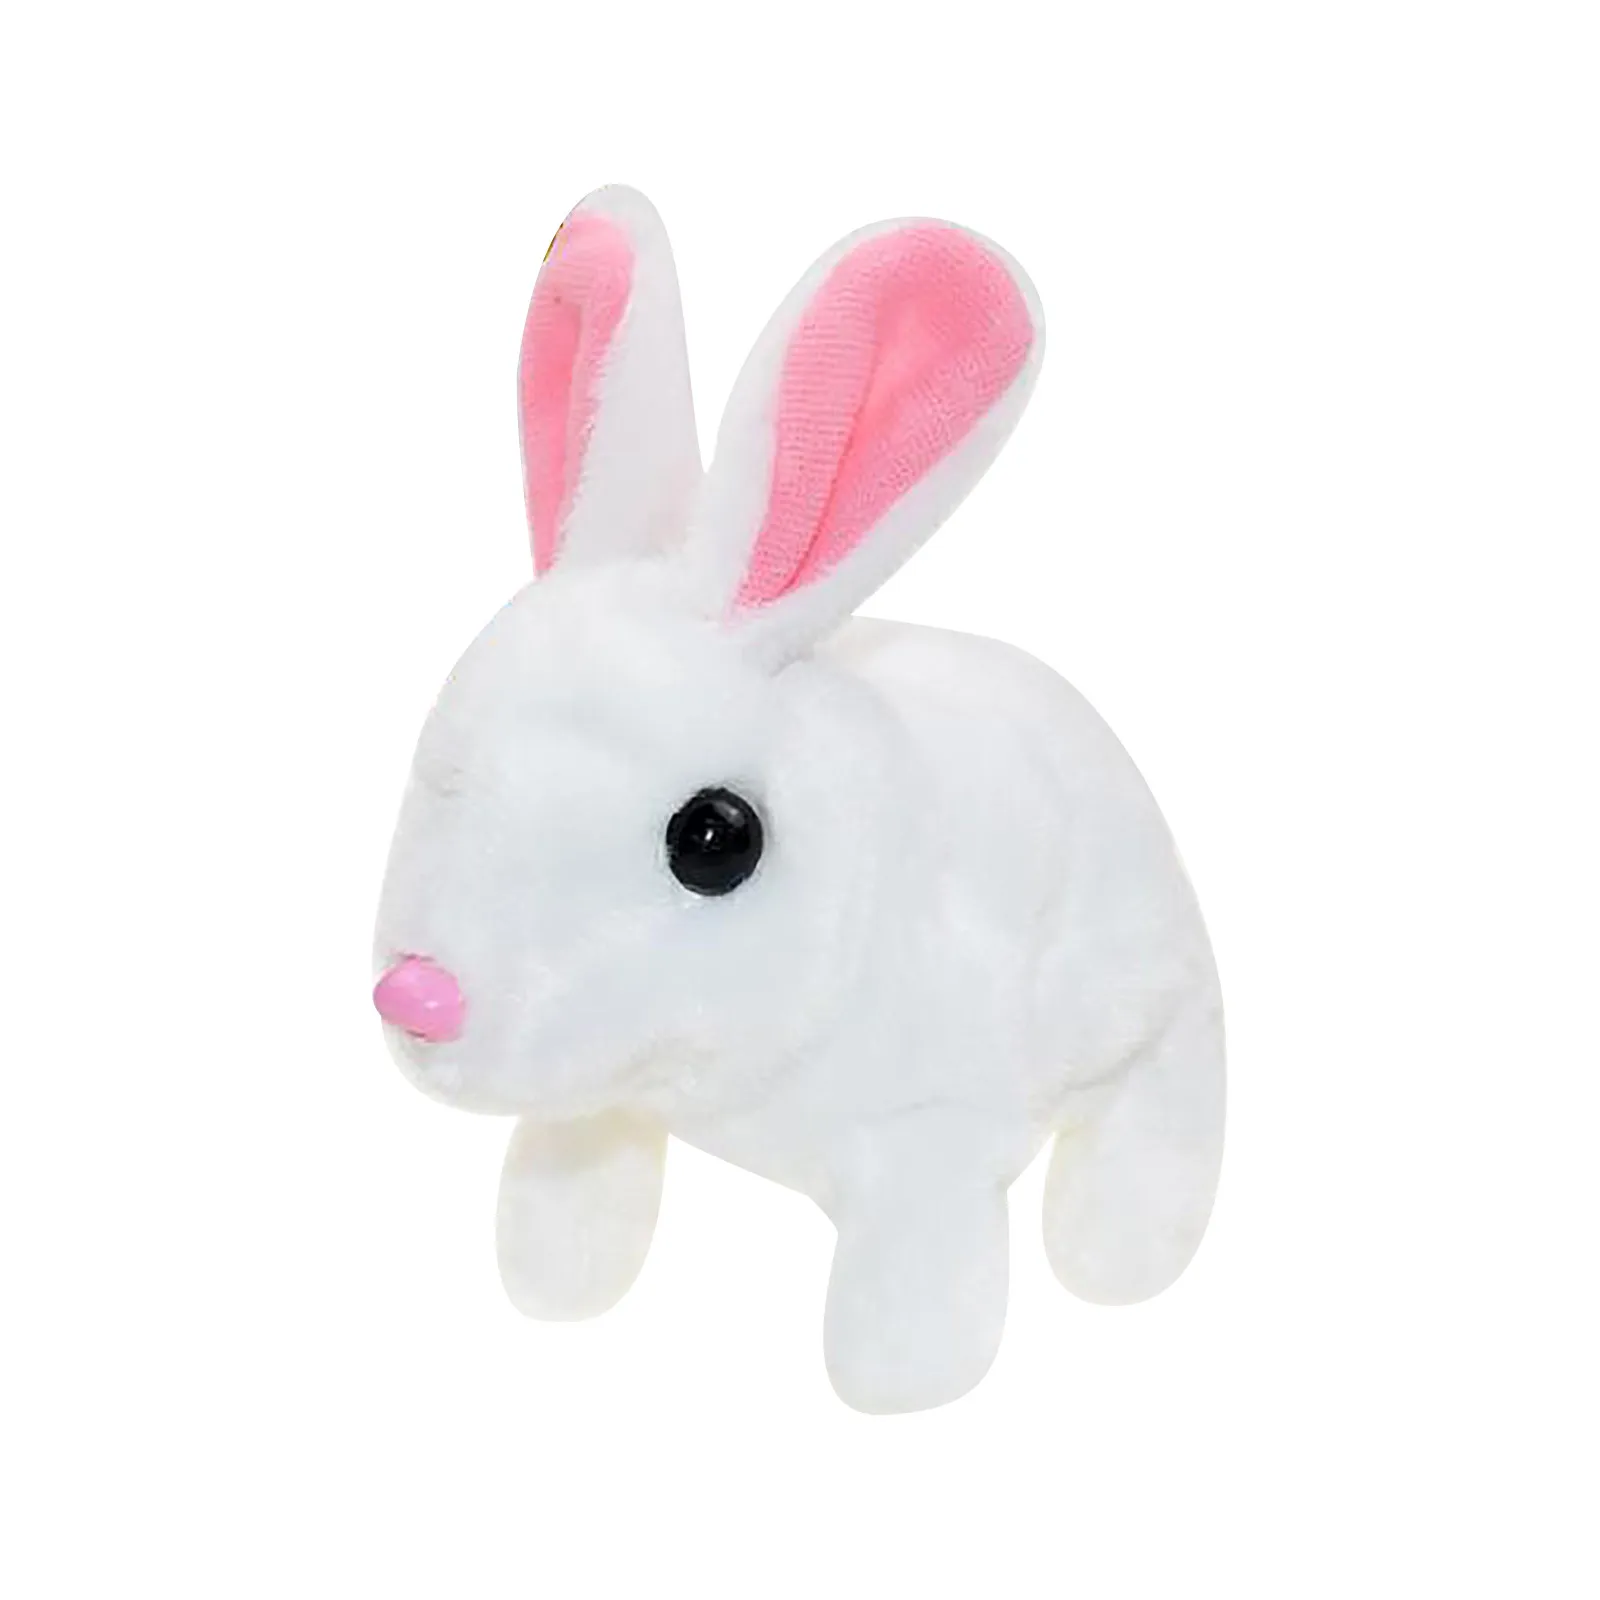 Details about   Electric Plush Rabbit Model Pet Toy Cute Animal Doll Prop Decor Kids Child Gift